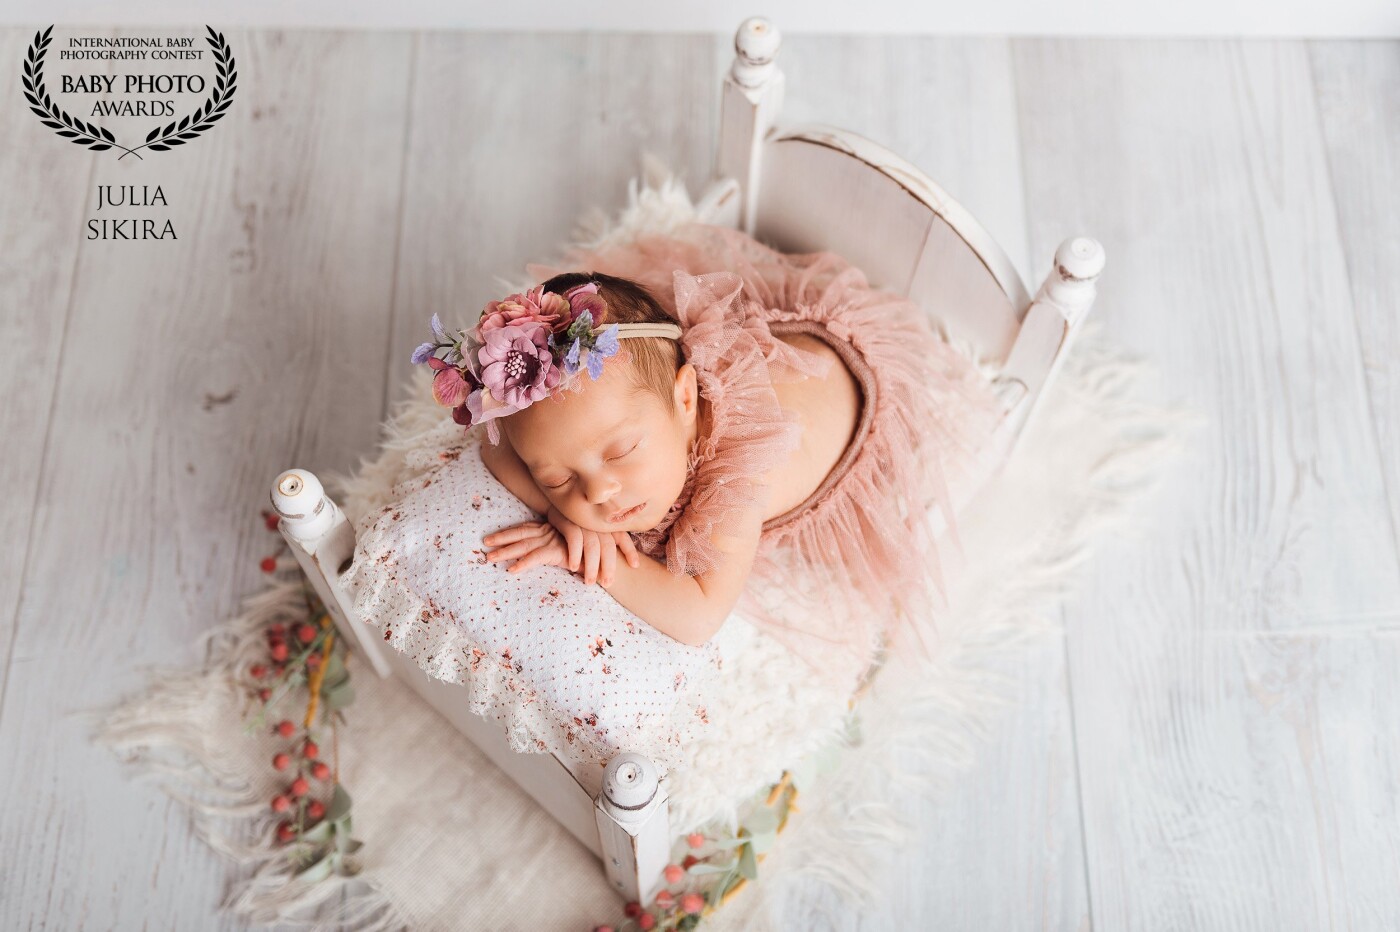 In this photo, you can see the sleeping little princess. For the set, I chose pastel colors like white, rosa, and violet. I also love the perspective in the photo.